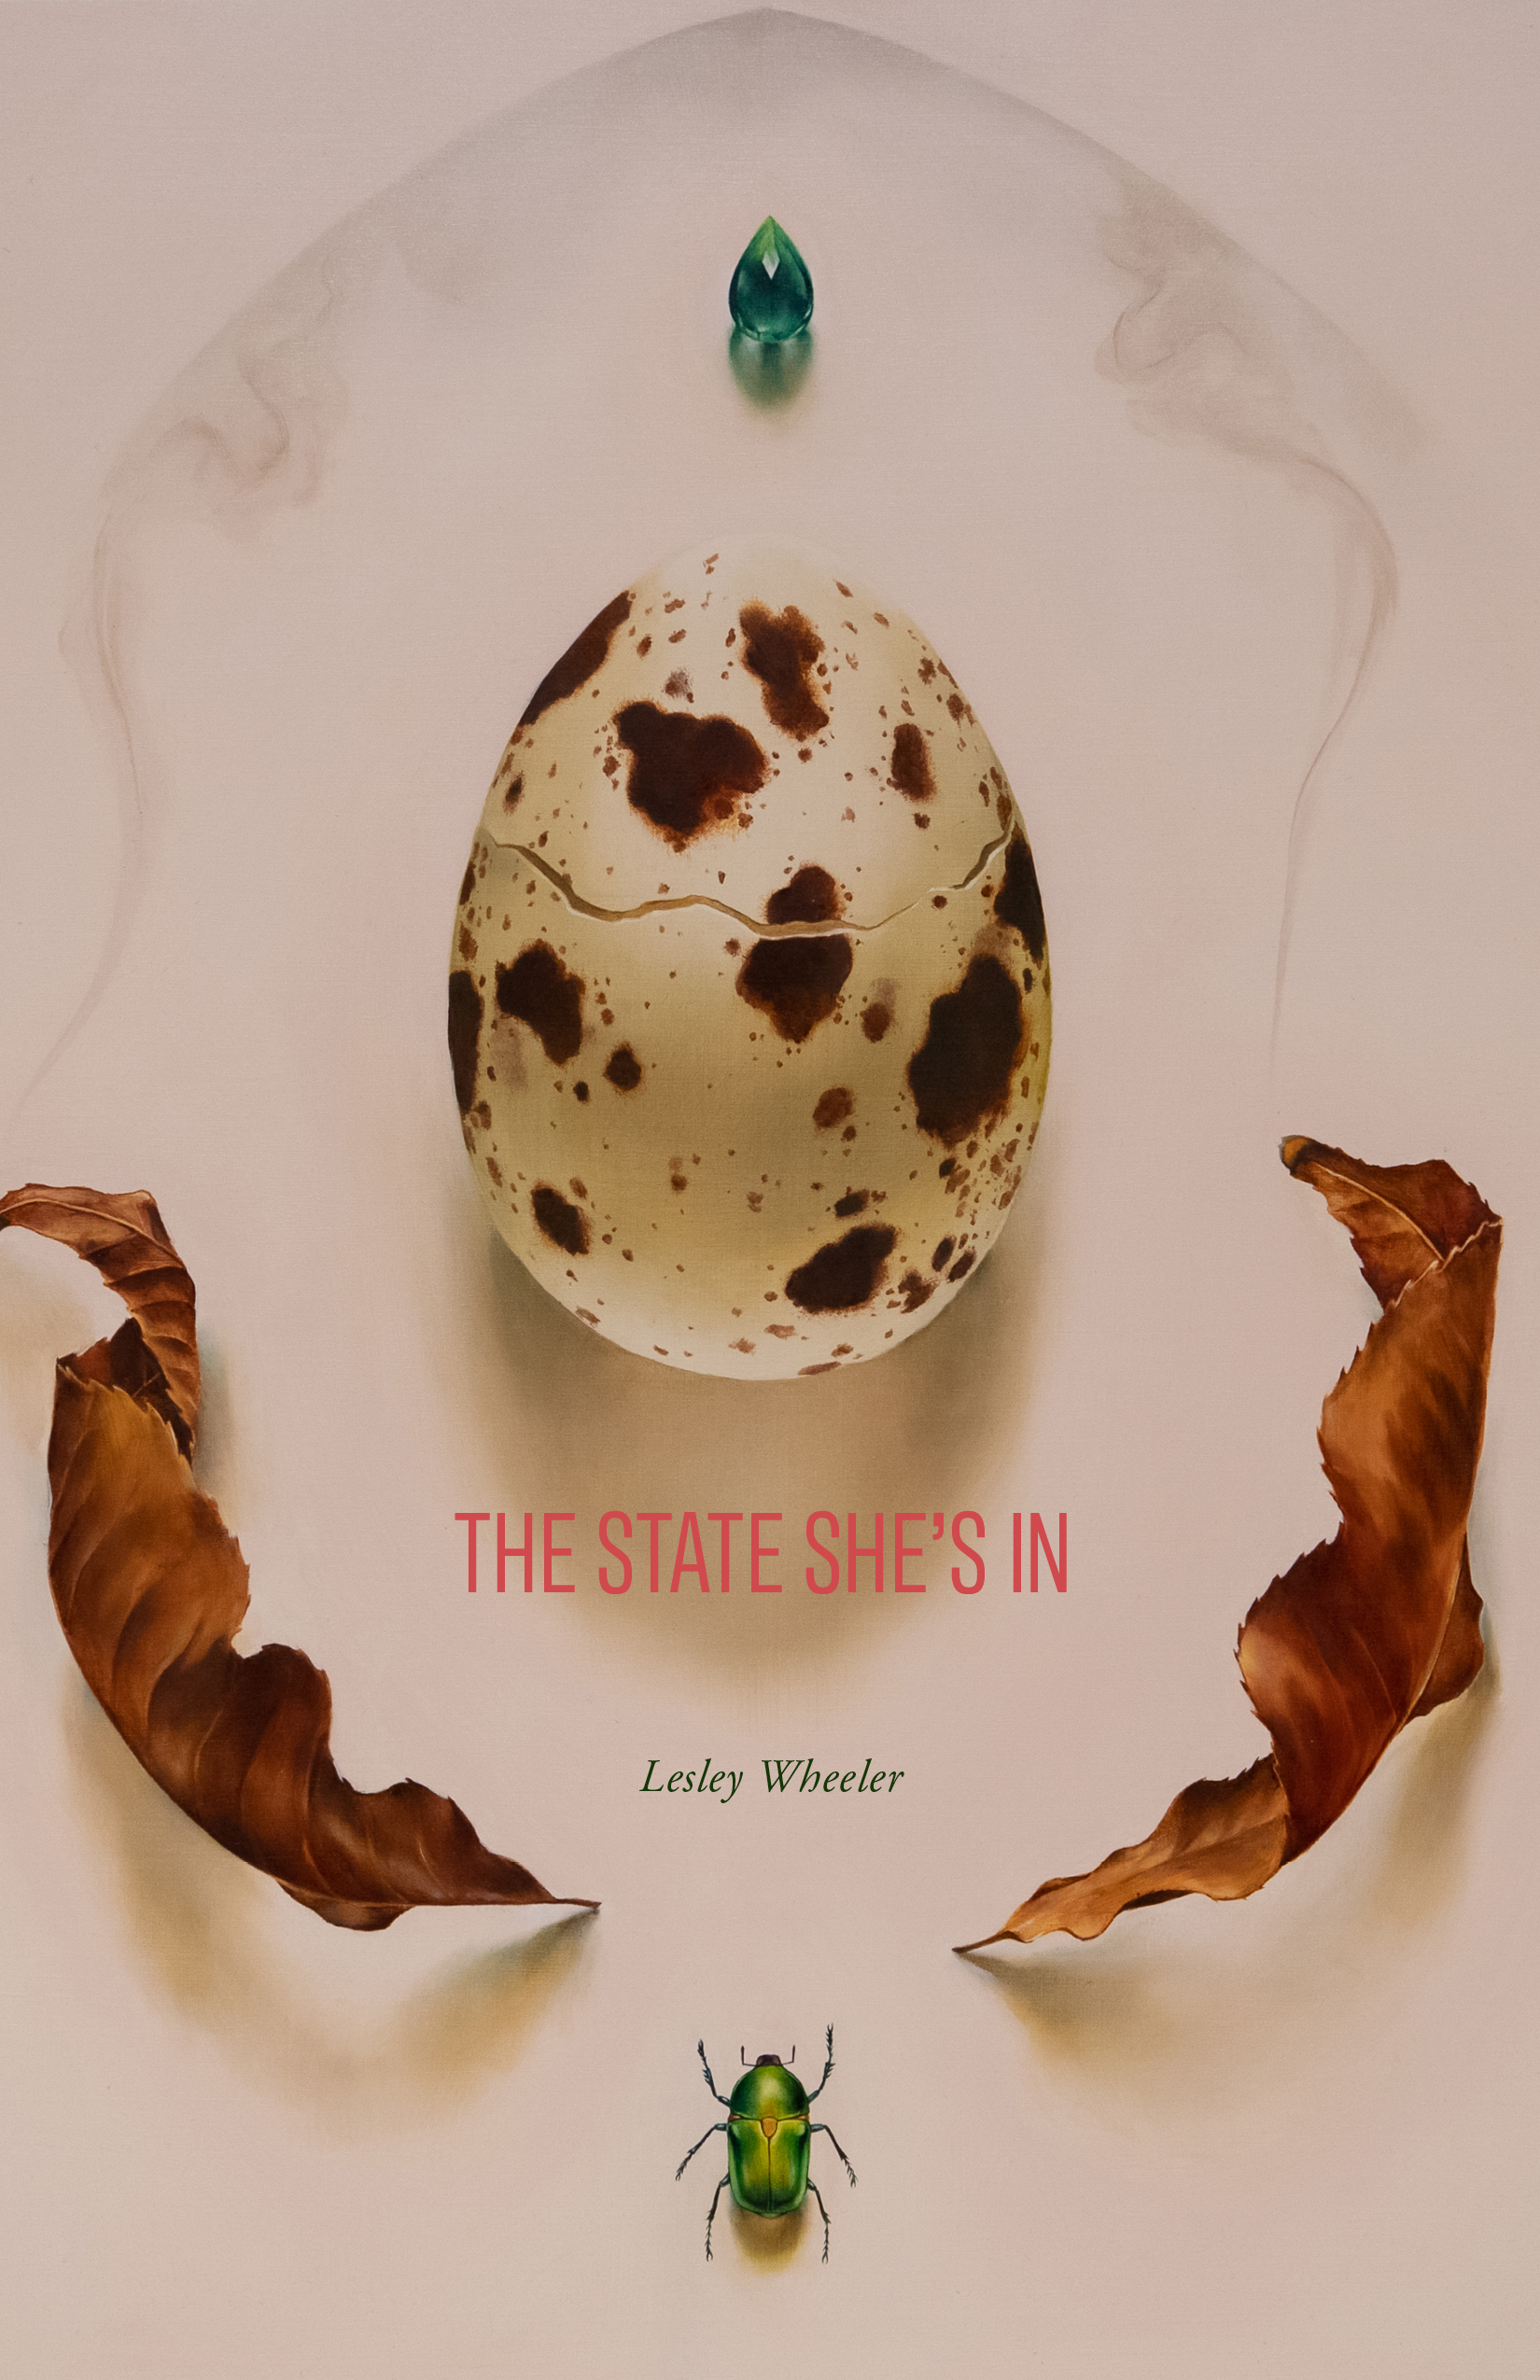 THE STATE SHE'S IN by Lesley Wheeler